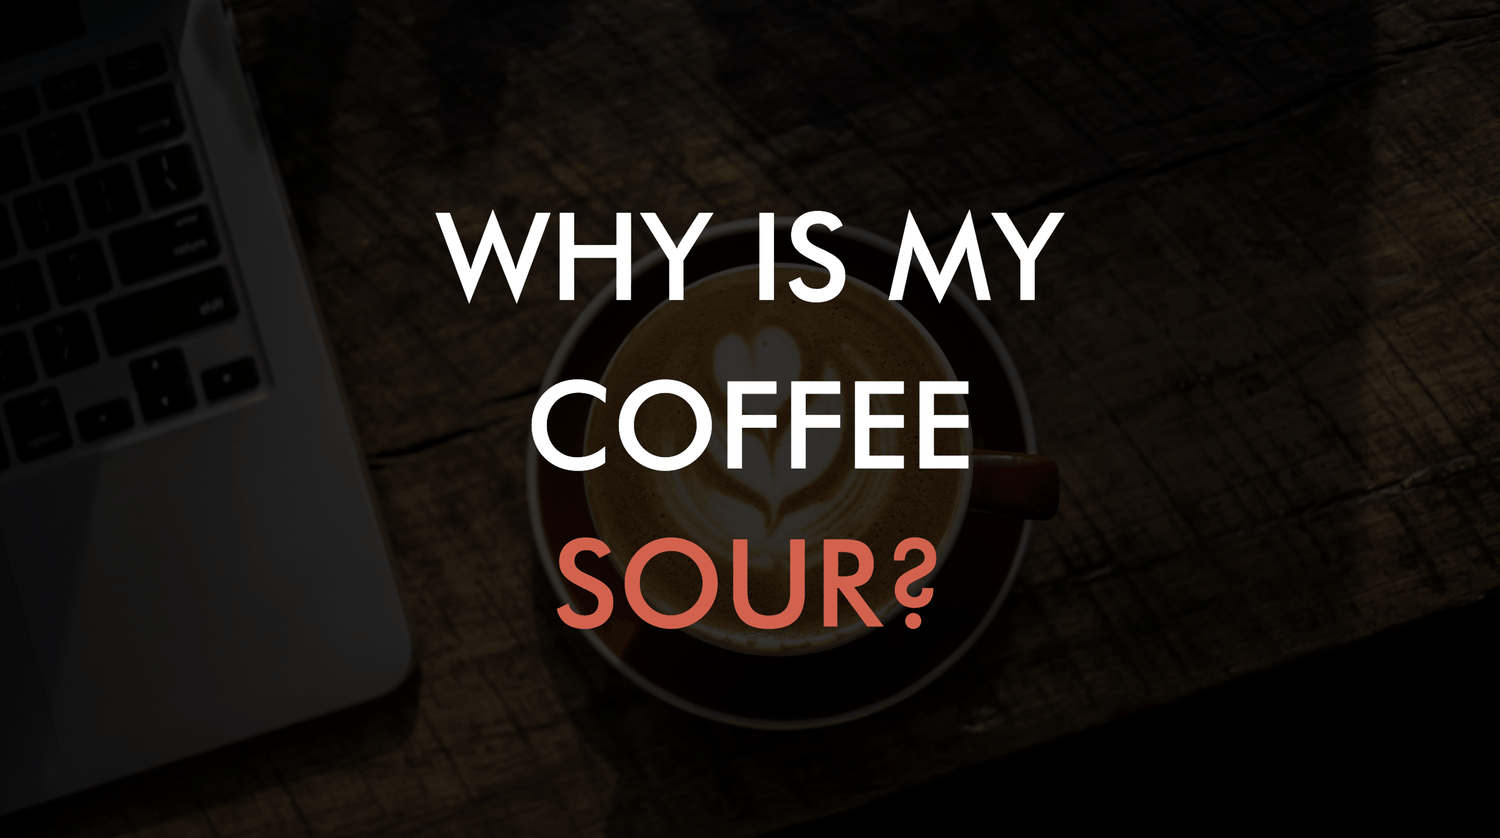 Why Is My Coffee Sour?